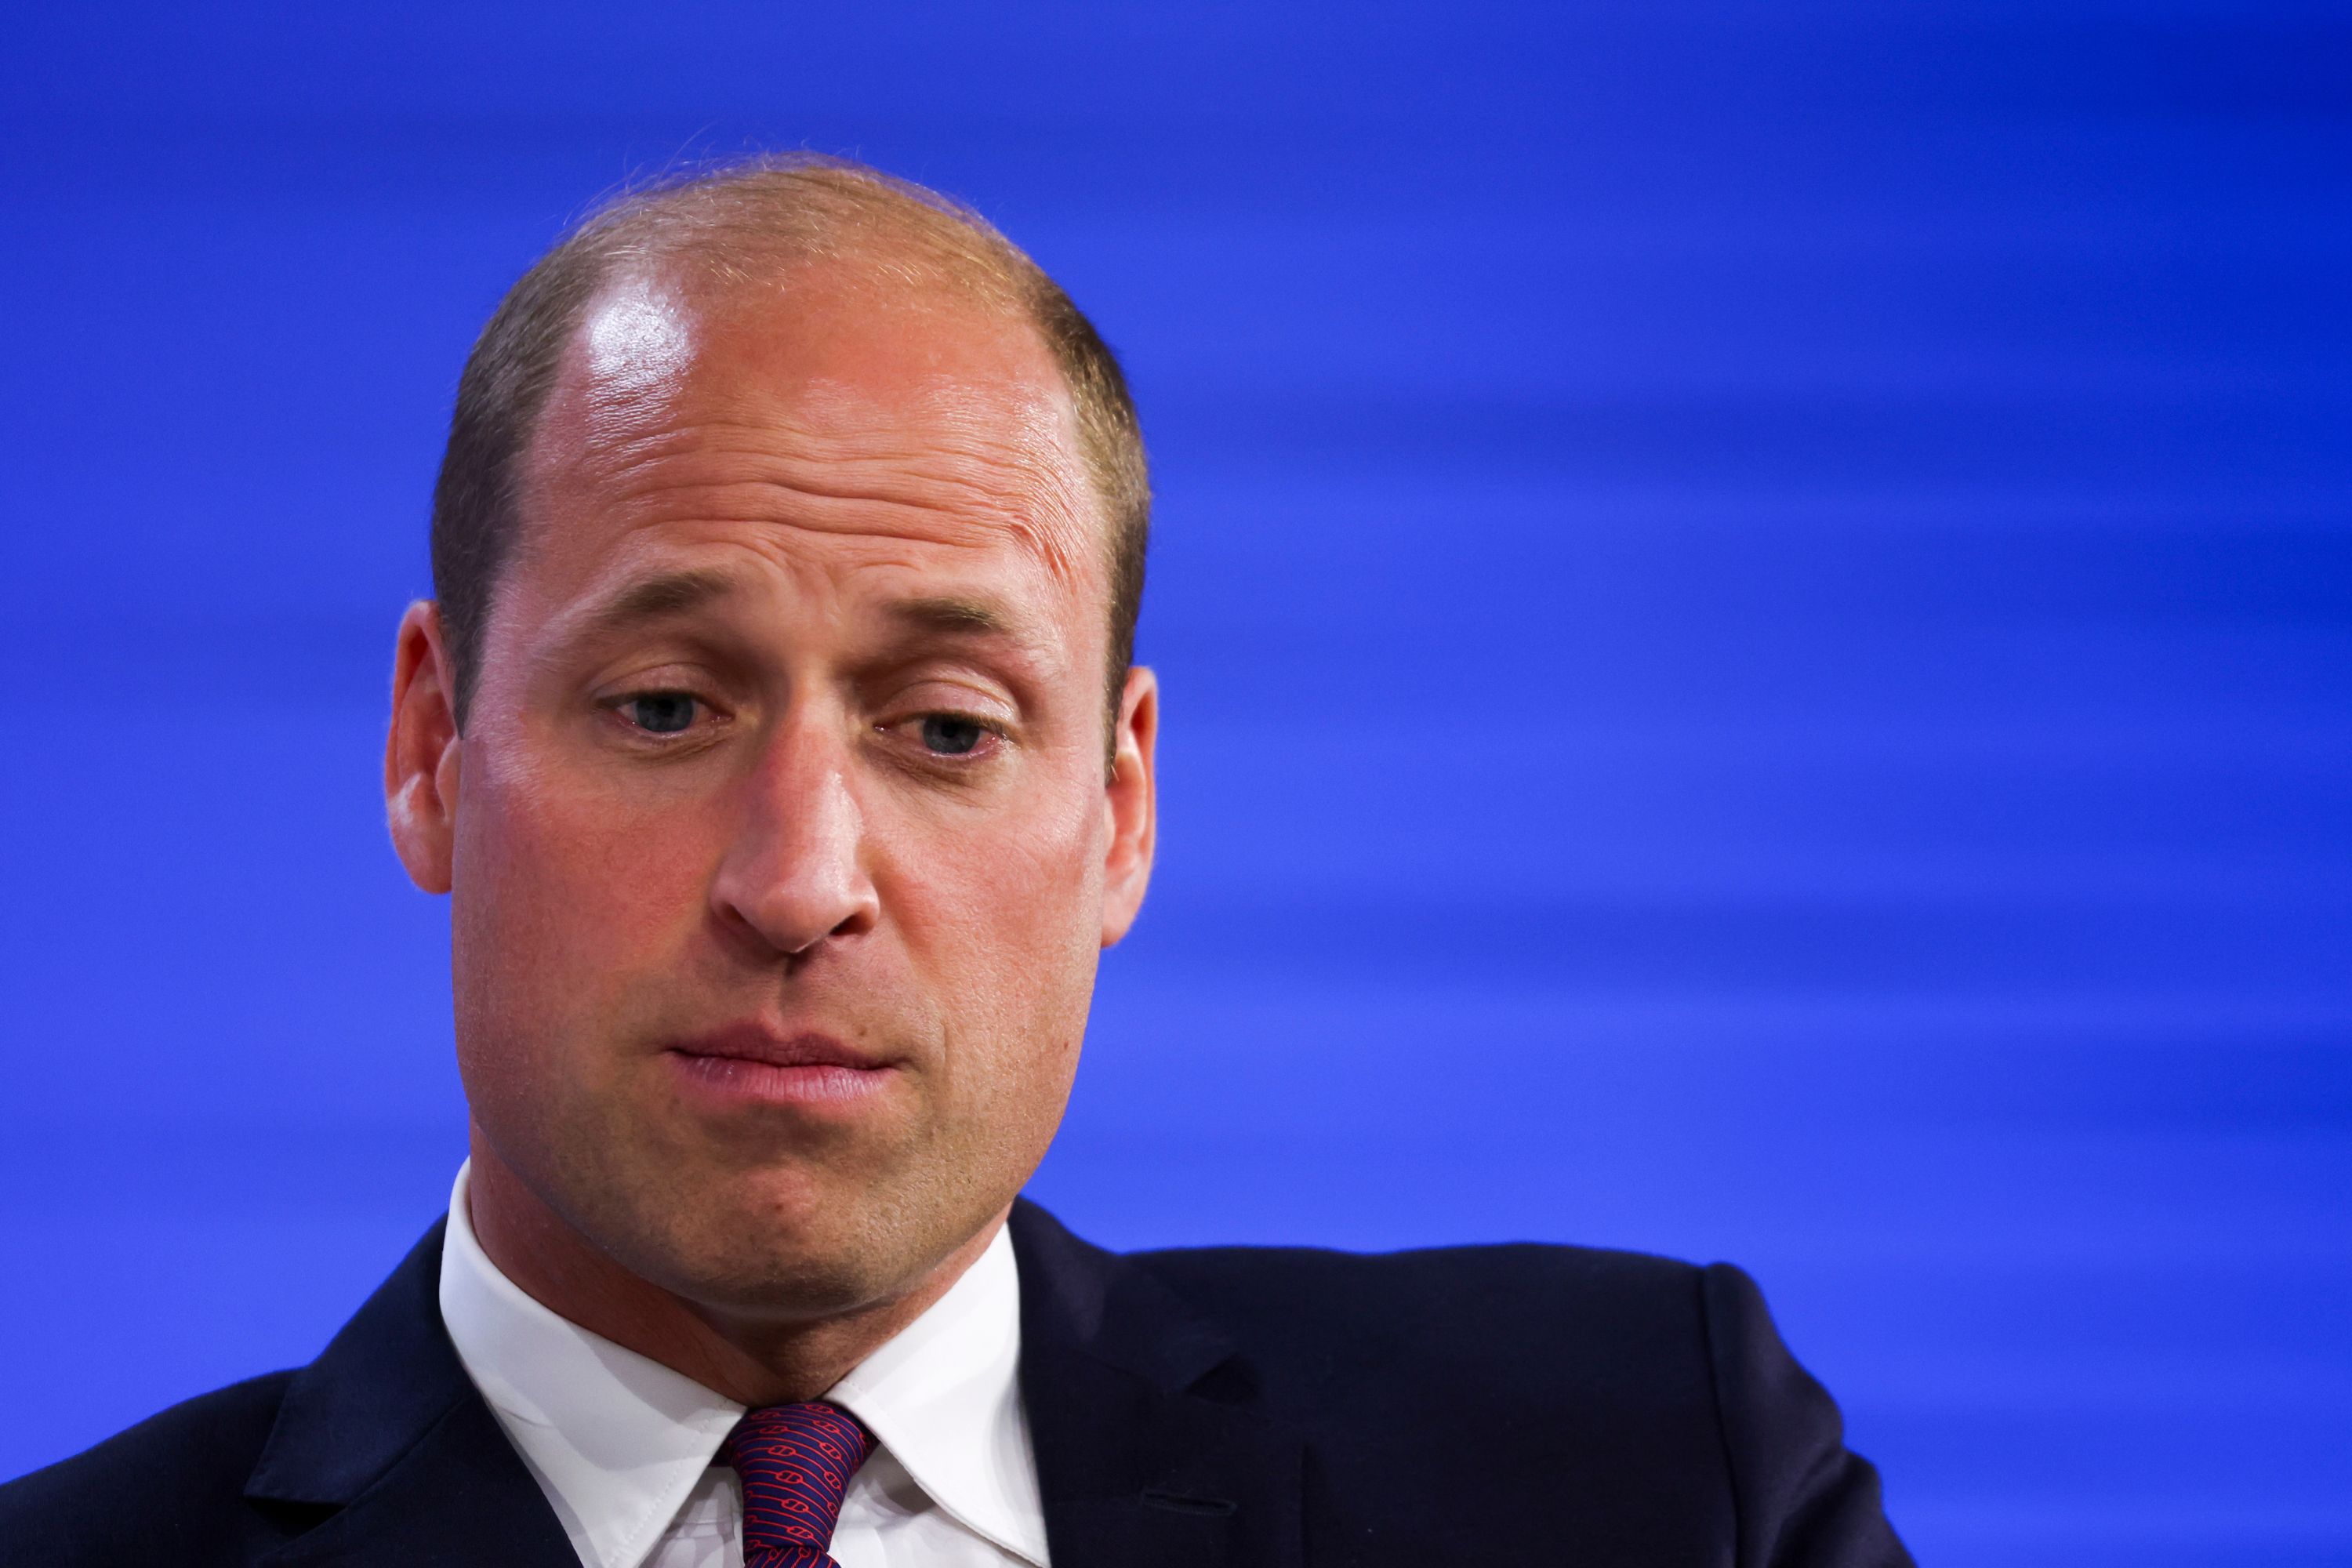 Prince William's New York Visit Overshadowed by Reparations Calls